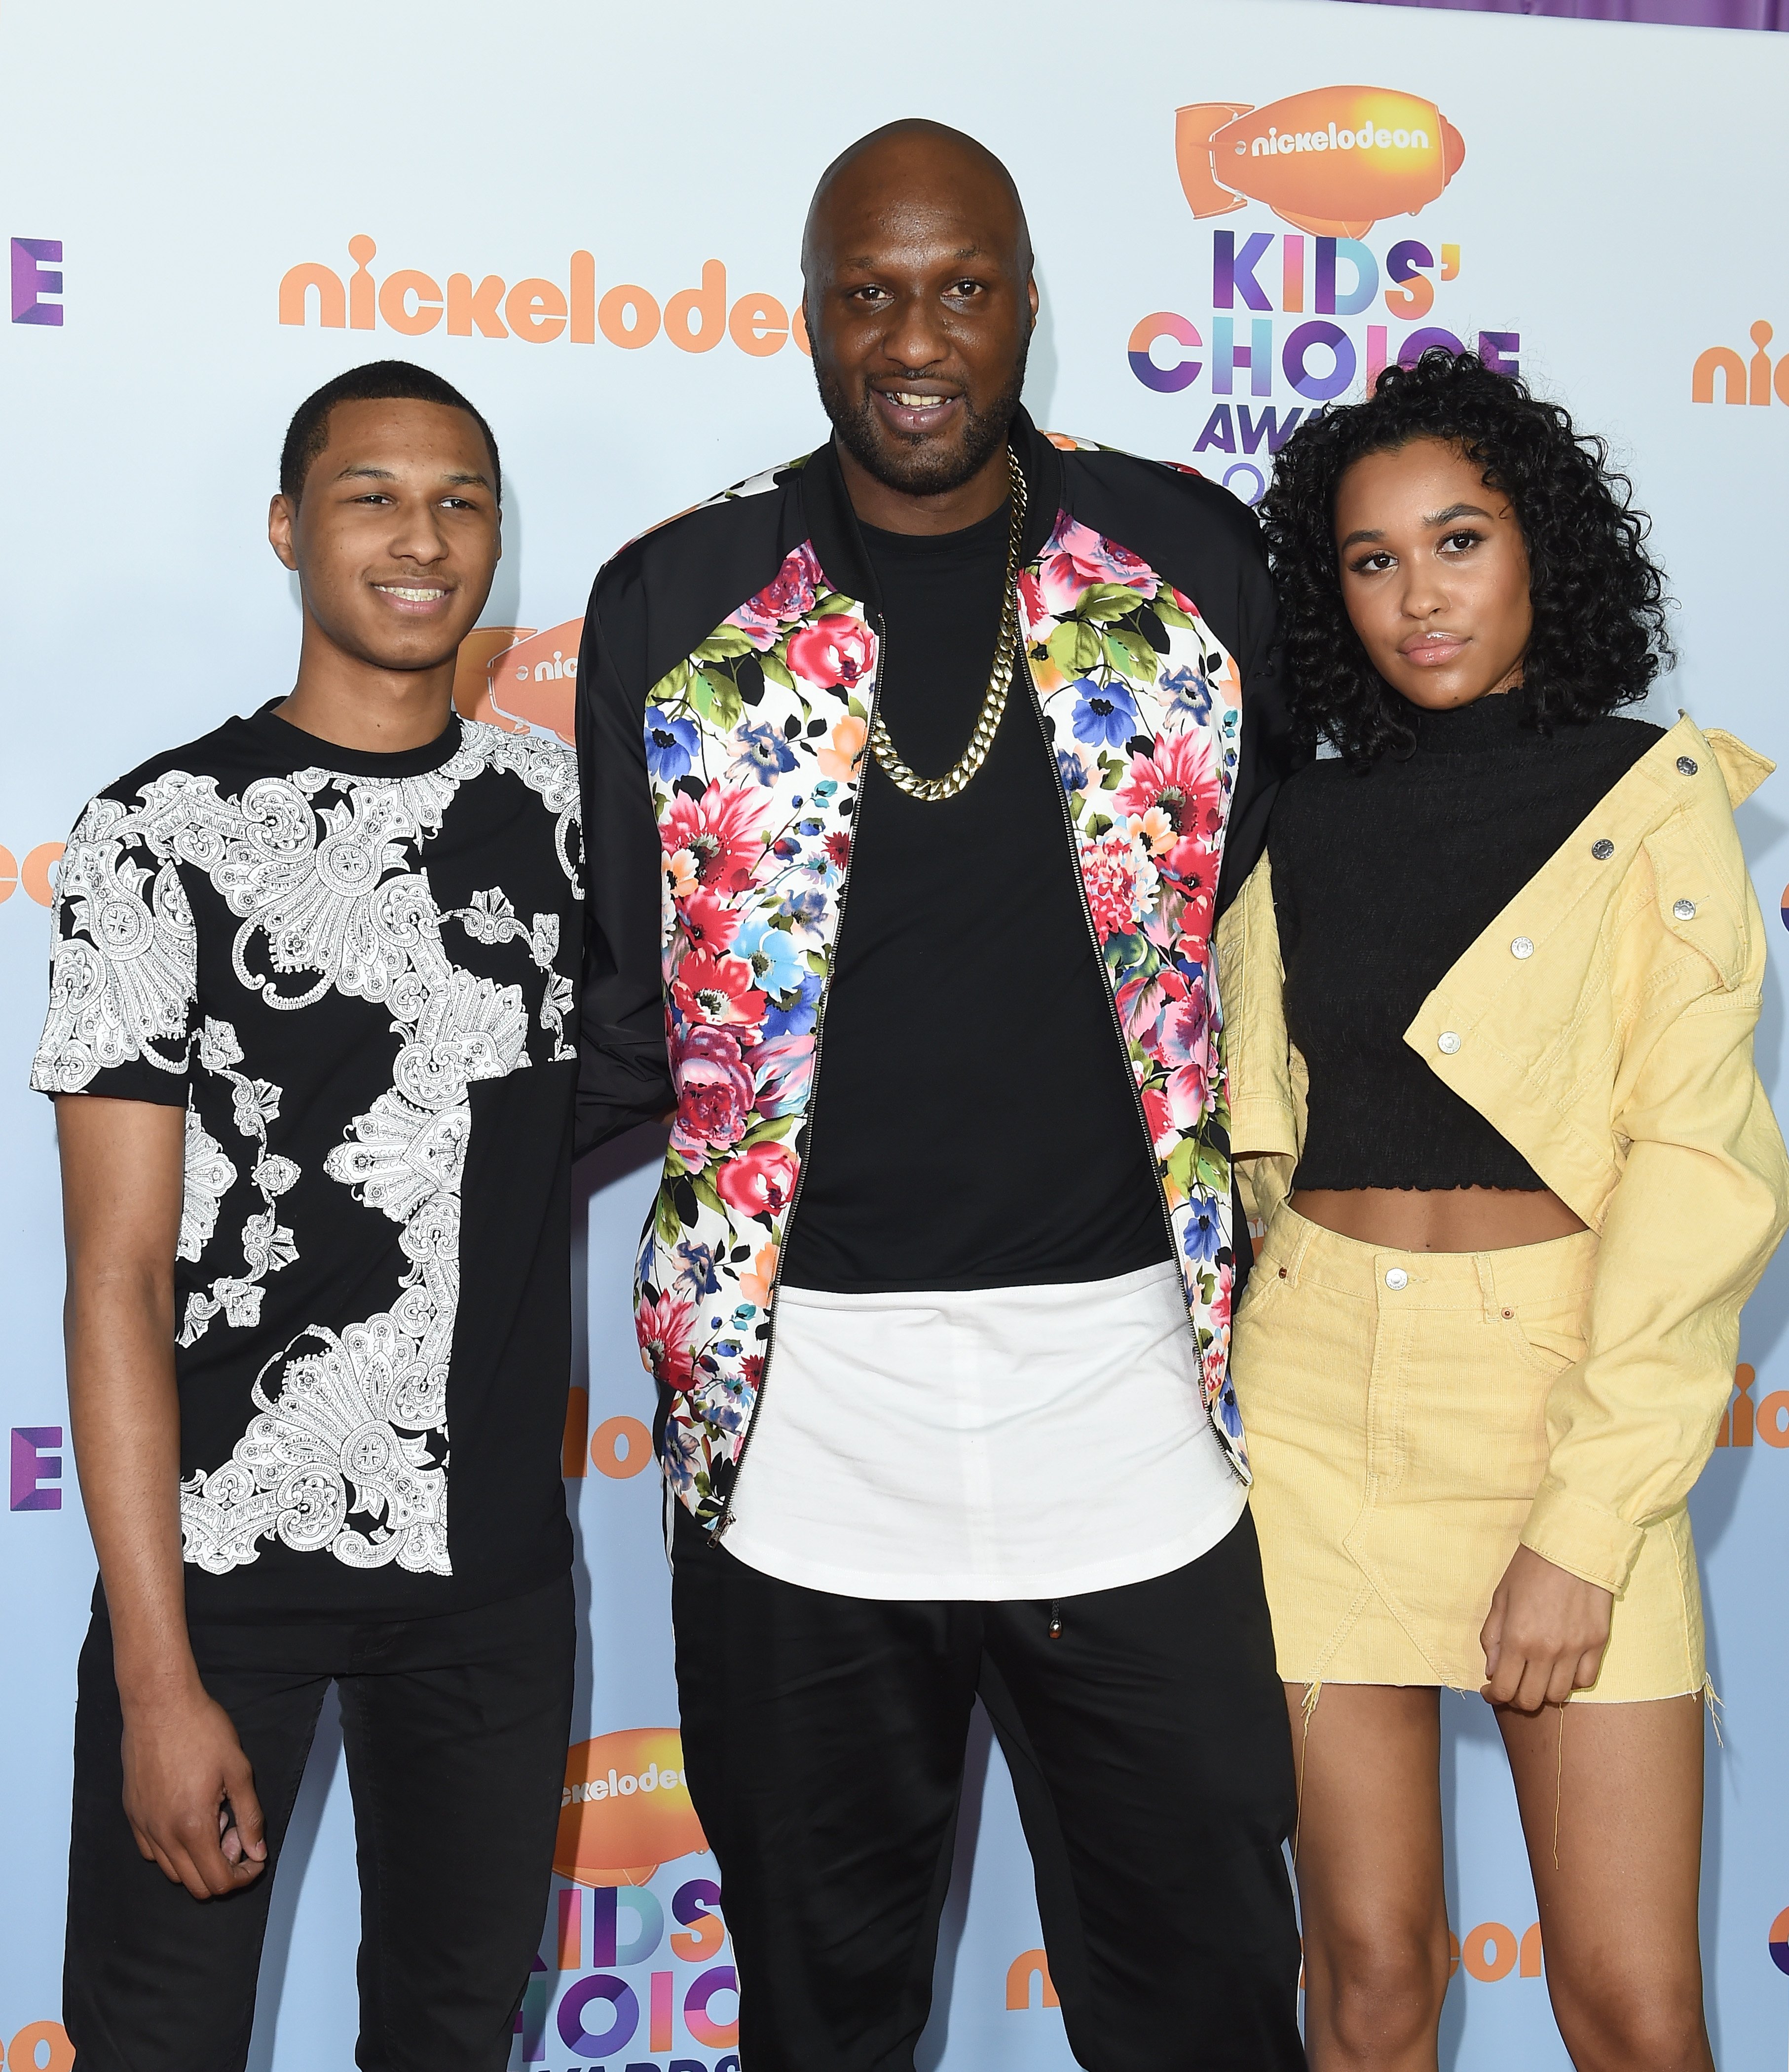 Basketball player Lamar Odom, son Lamar Odom Jr and daughter Destiny Odom at Nickelodeon's 2017 Kids' Choice Awards in 2017 in Los Angeles. | Source: Getty Images